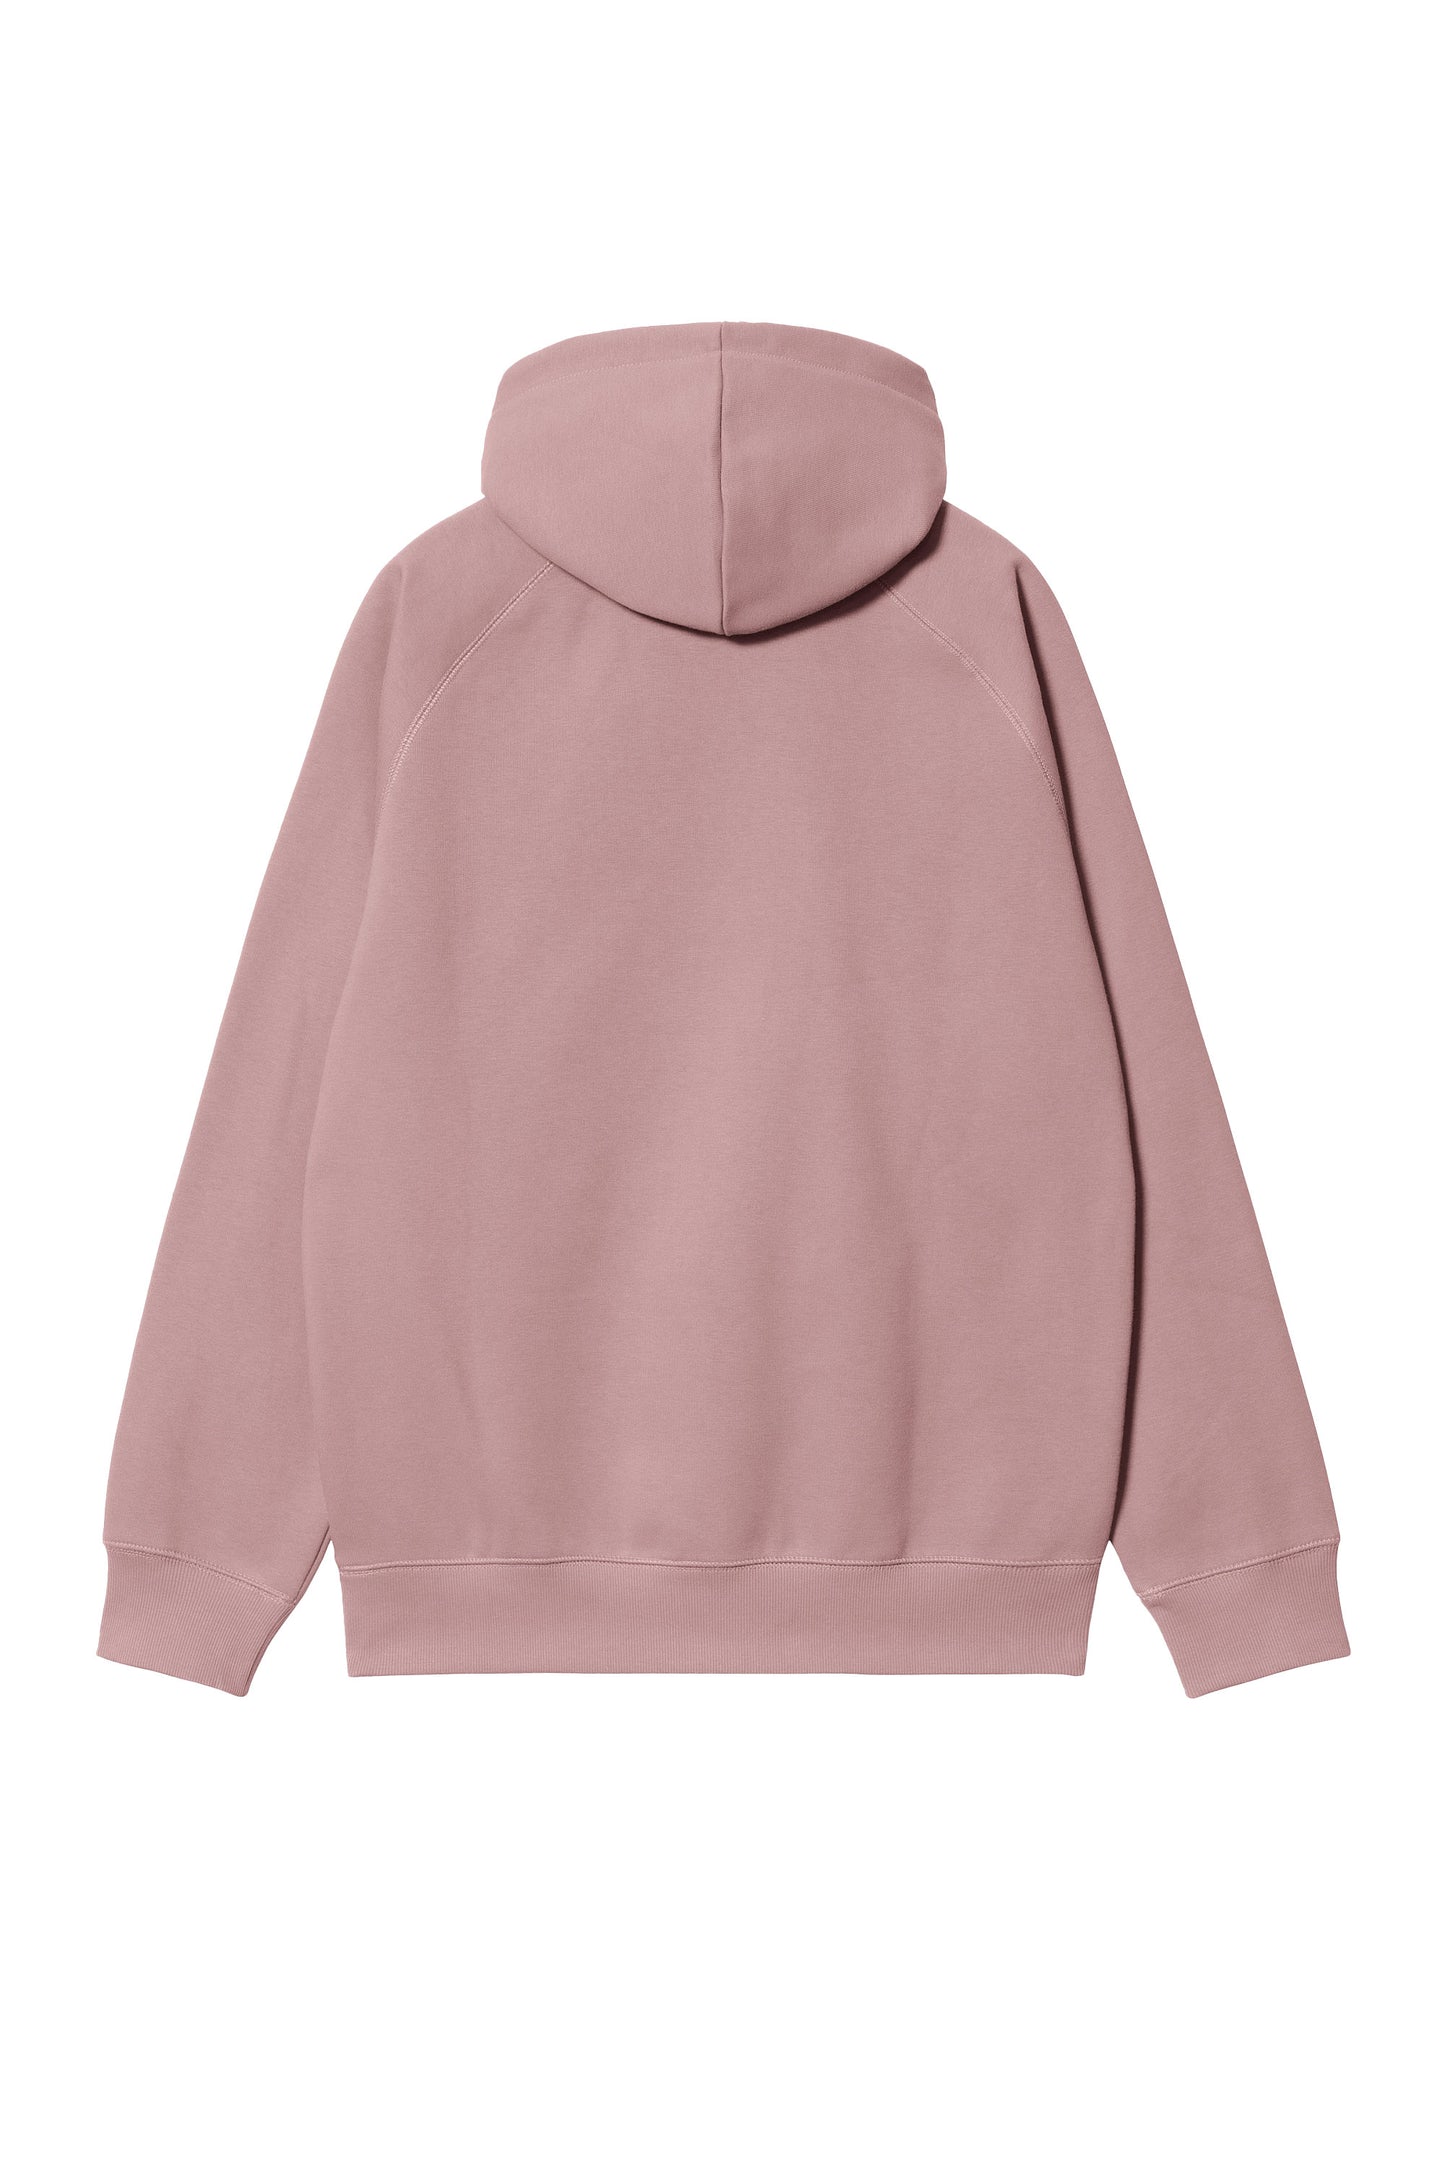 Pukas-Surf-Shop-carhartt-hooded-chase-sweat-glassy-pink